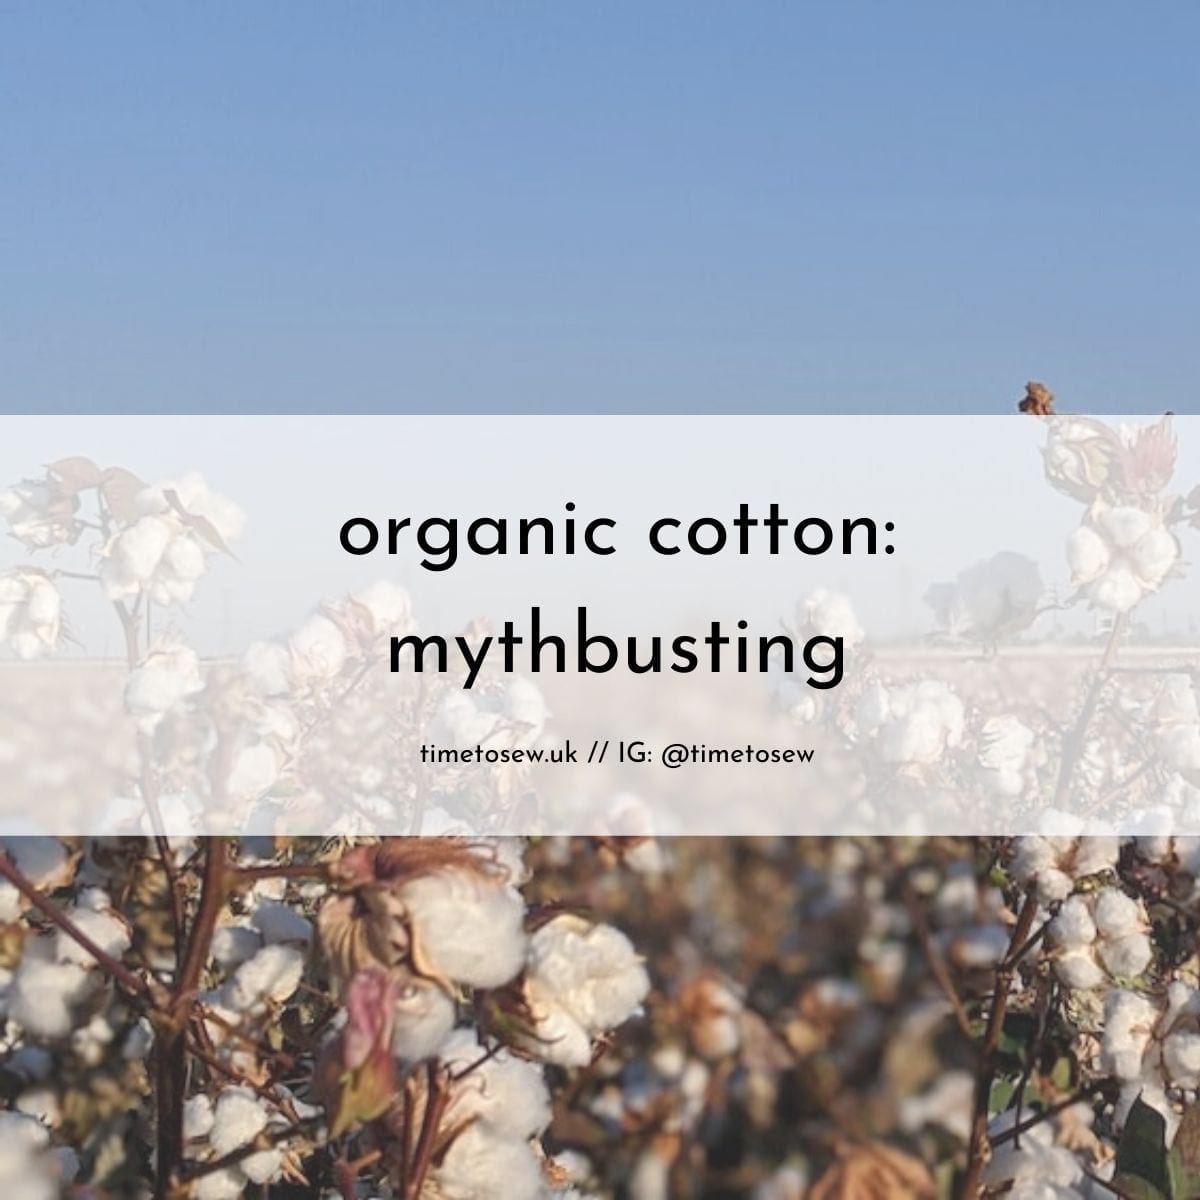 Organic cotton might be worse for the environment than regular cotton